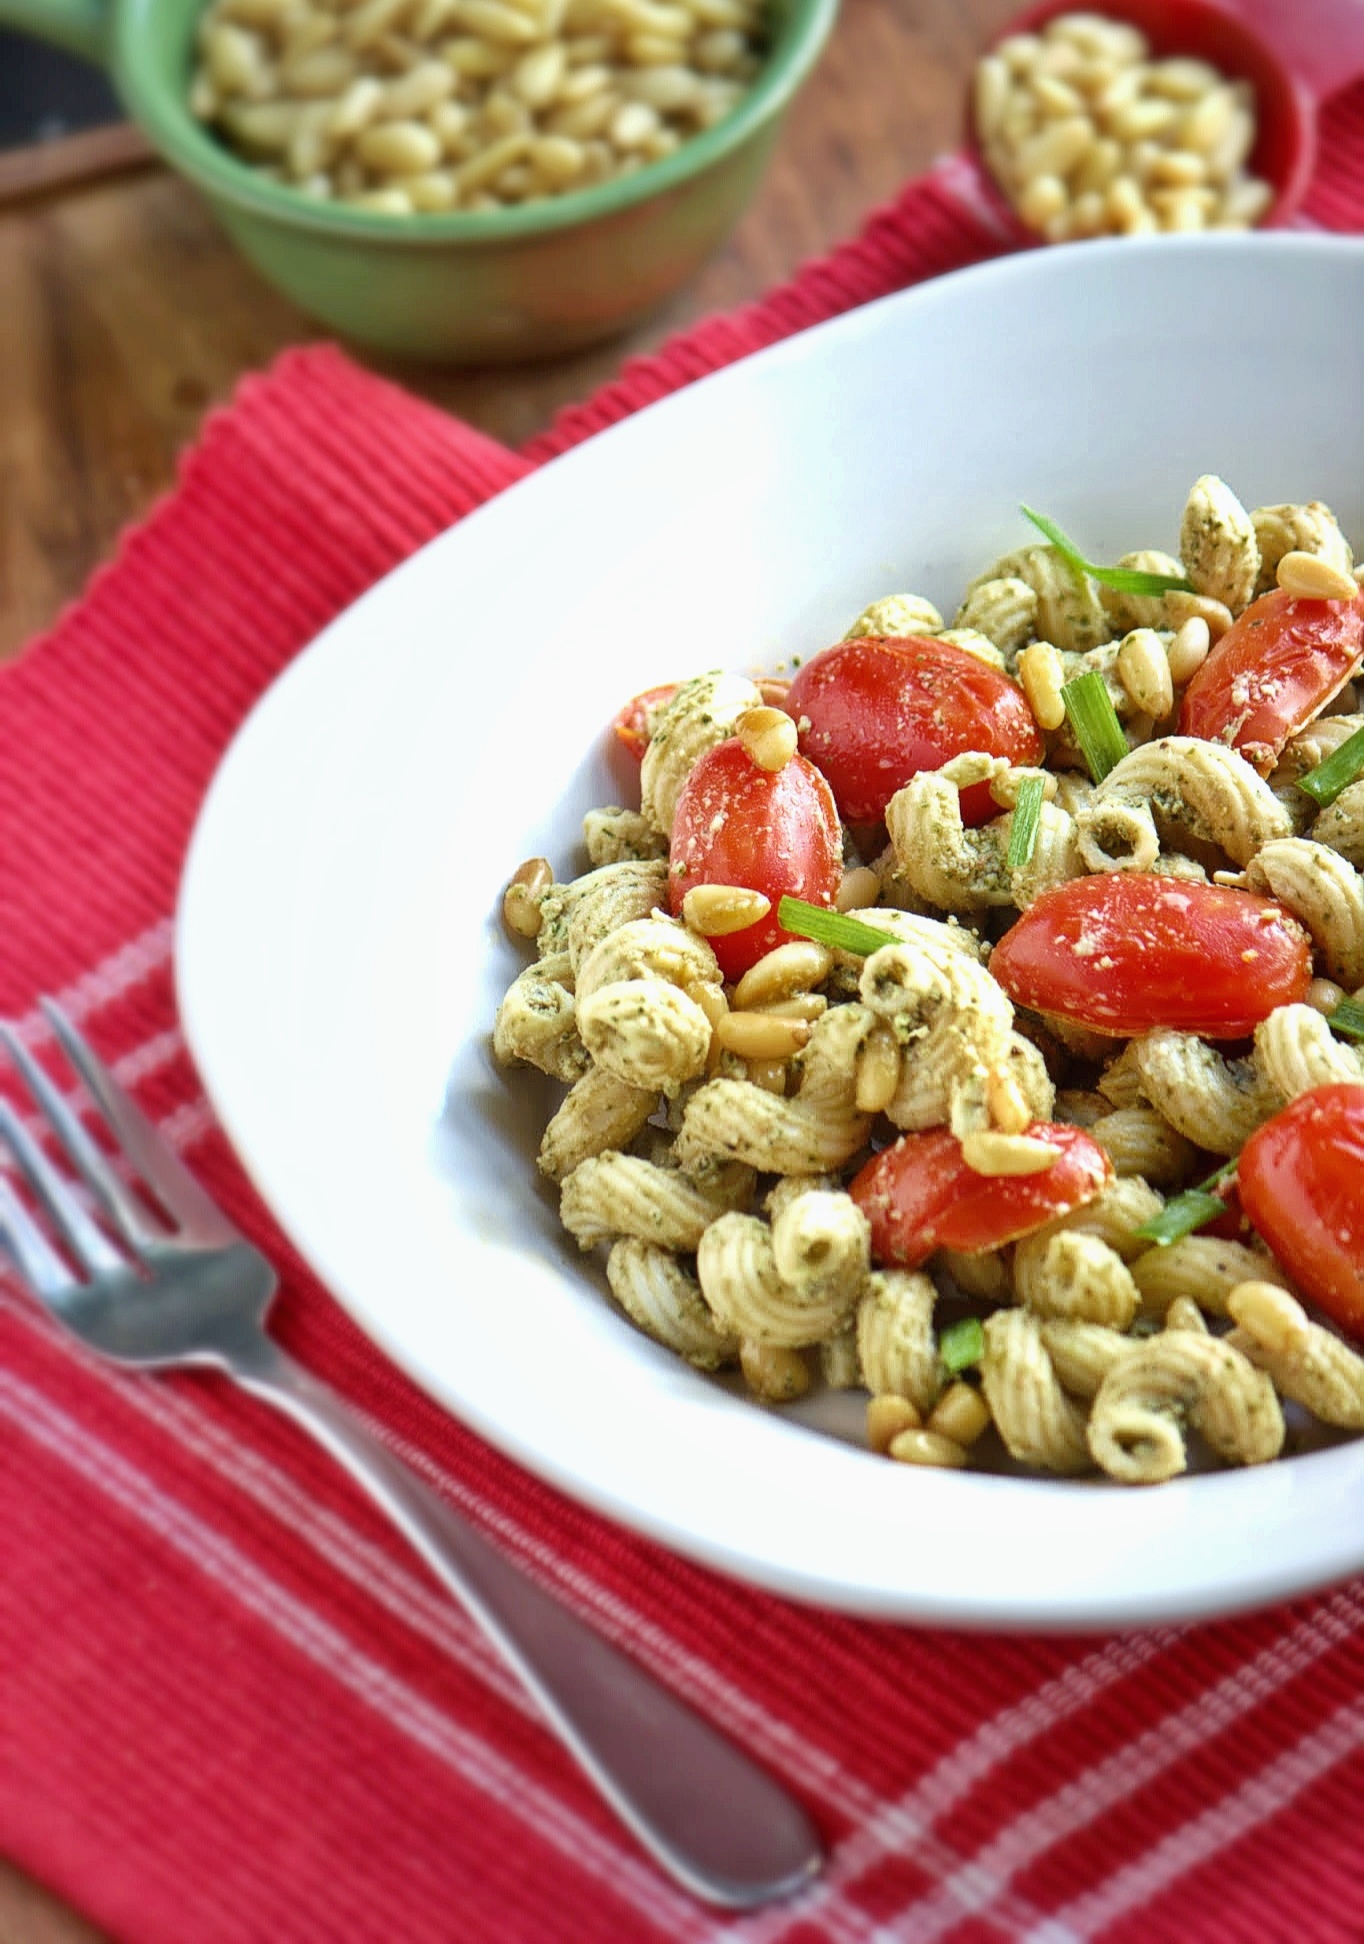 Pesto and Goat Cheese Salad with Roasted Tomatoes